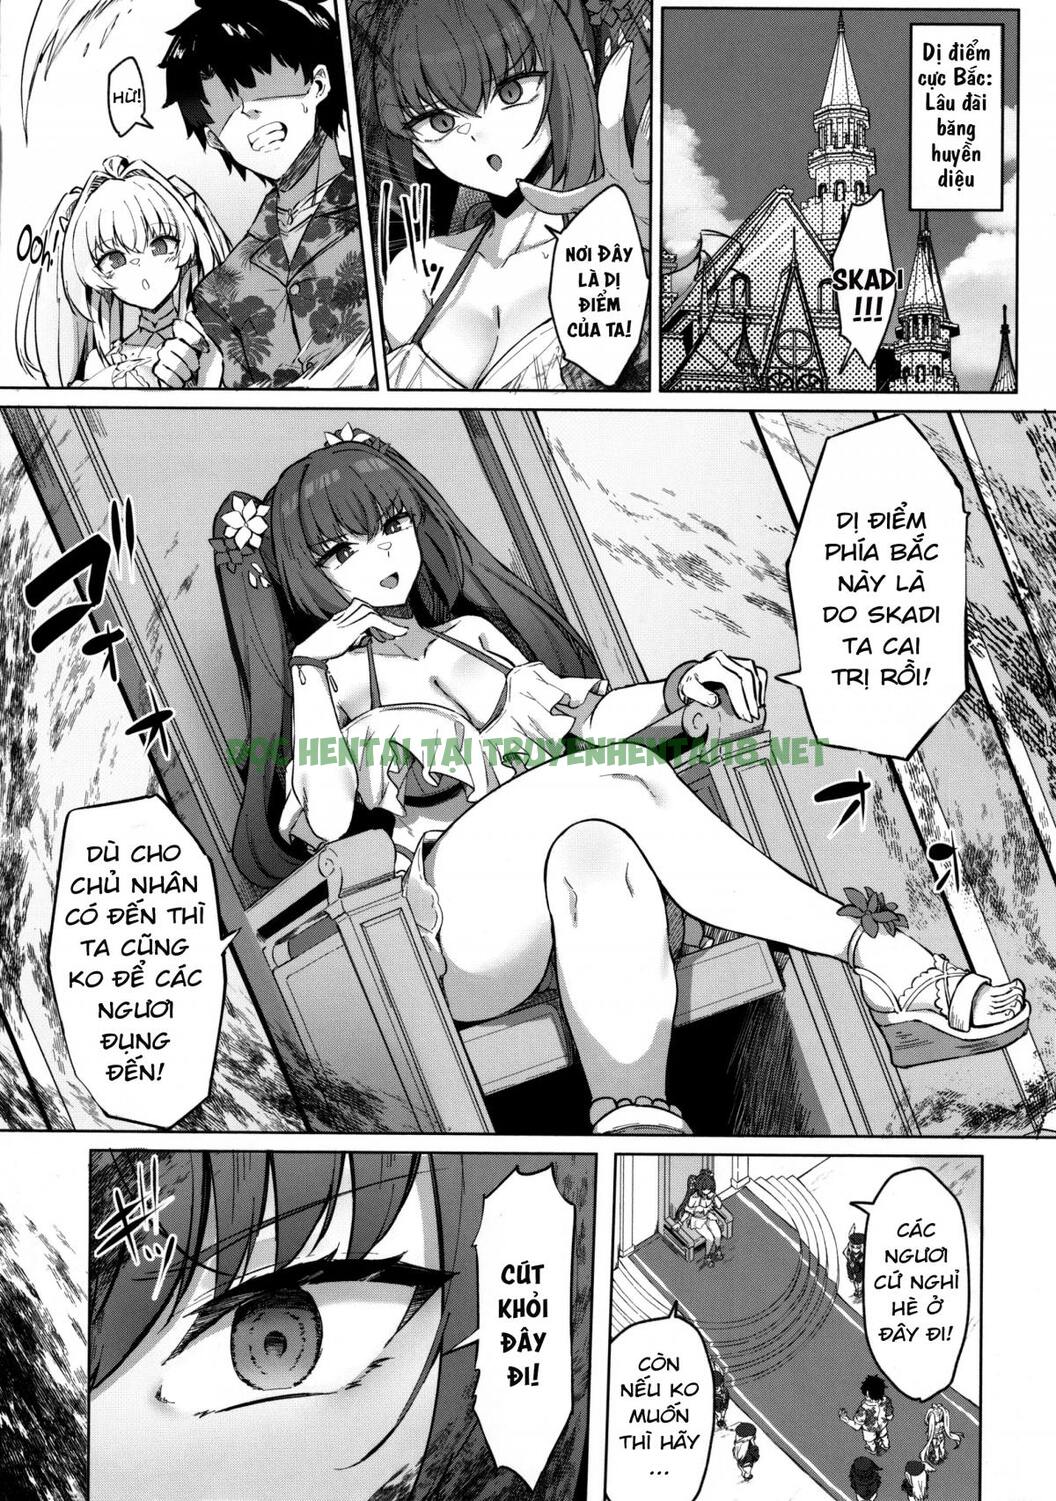 Xem ảnh Chaldea Midsummer Vacation. Marrying And Mana Transferring With Bride Skad - One Shot - 4 - Hentai24h.Tv